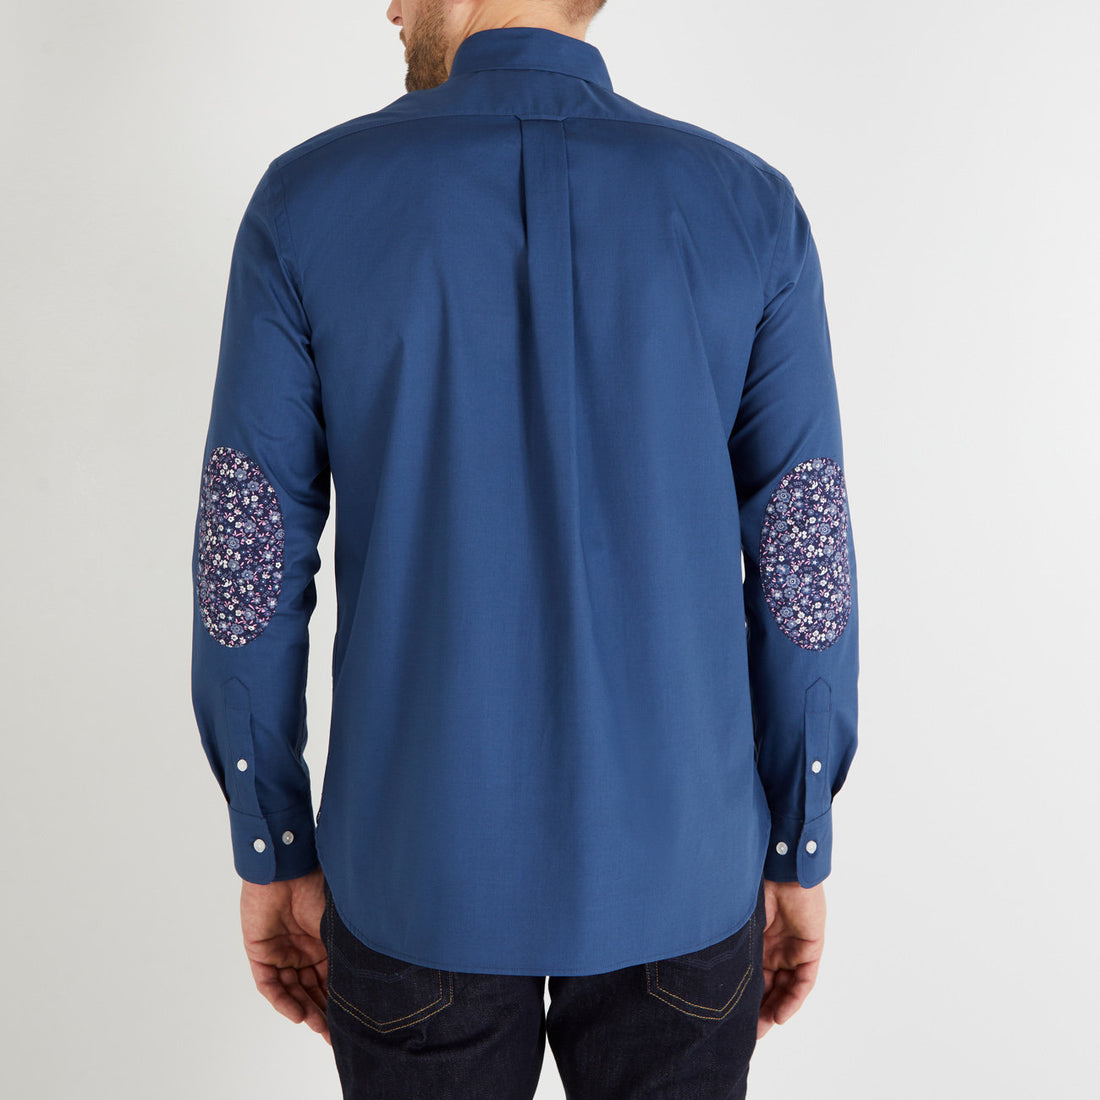 Blue Shirt With Floral Detail_H23CHECL0029_BLF1_02